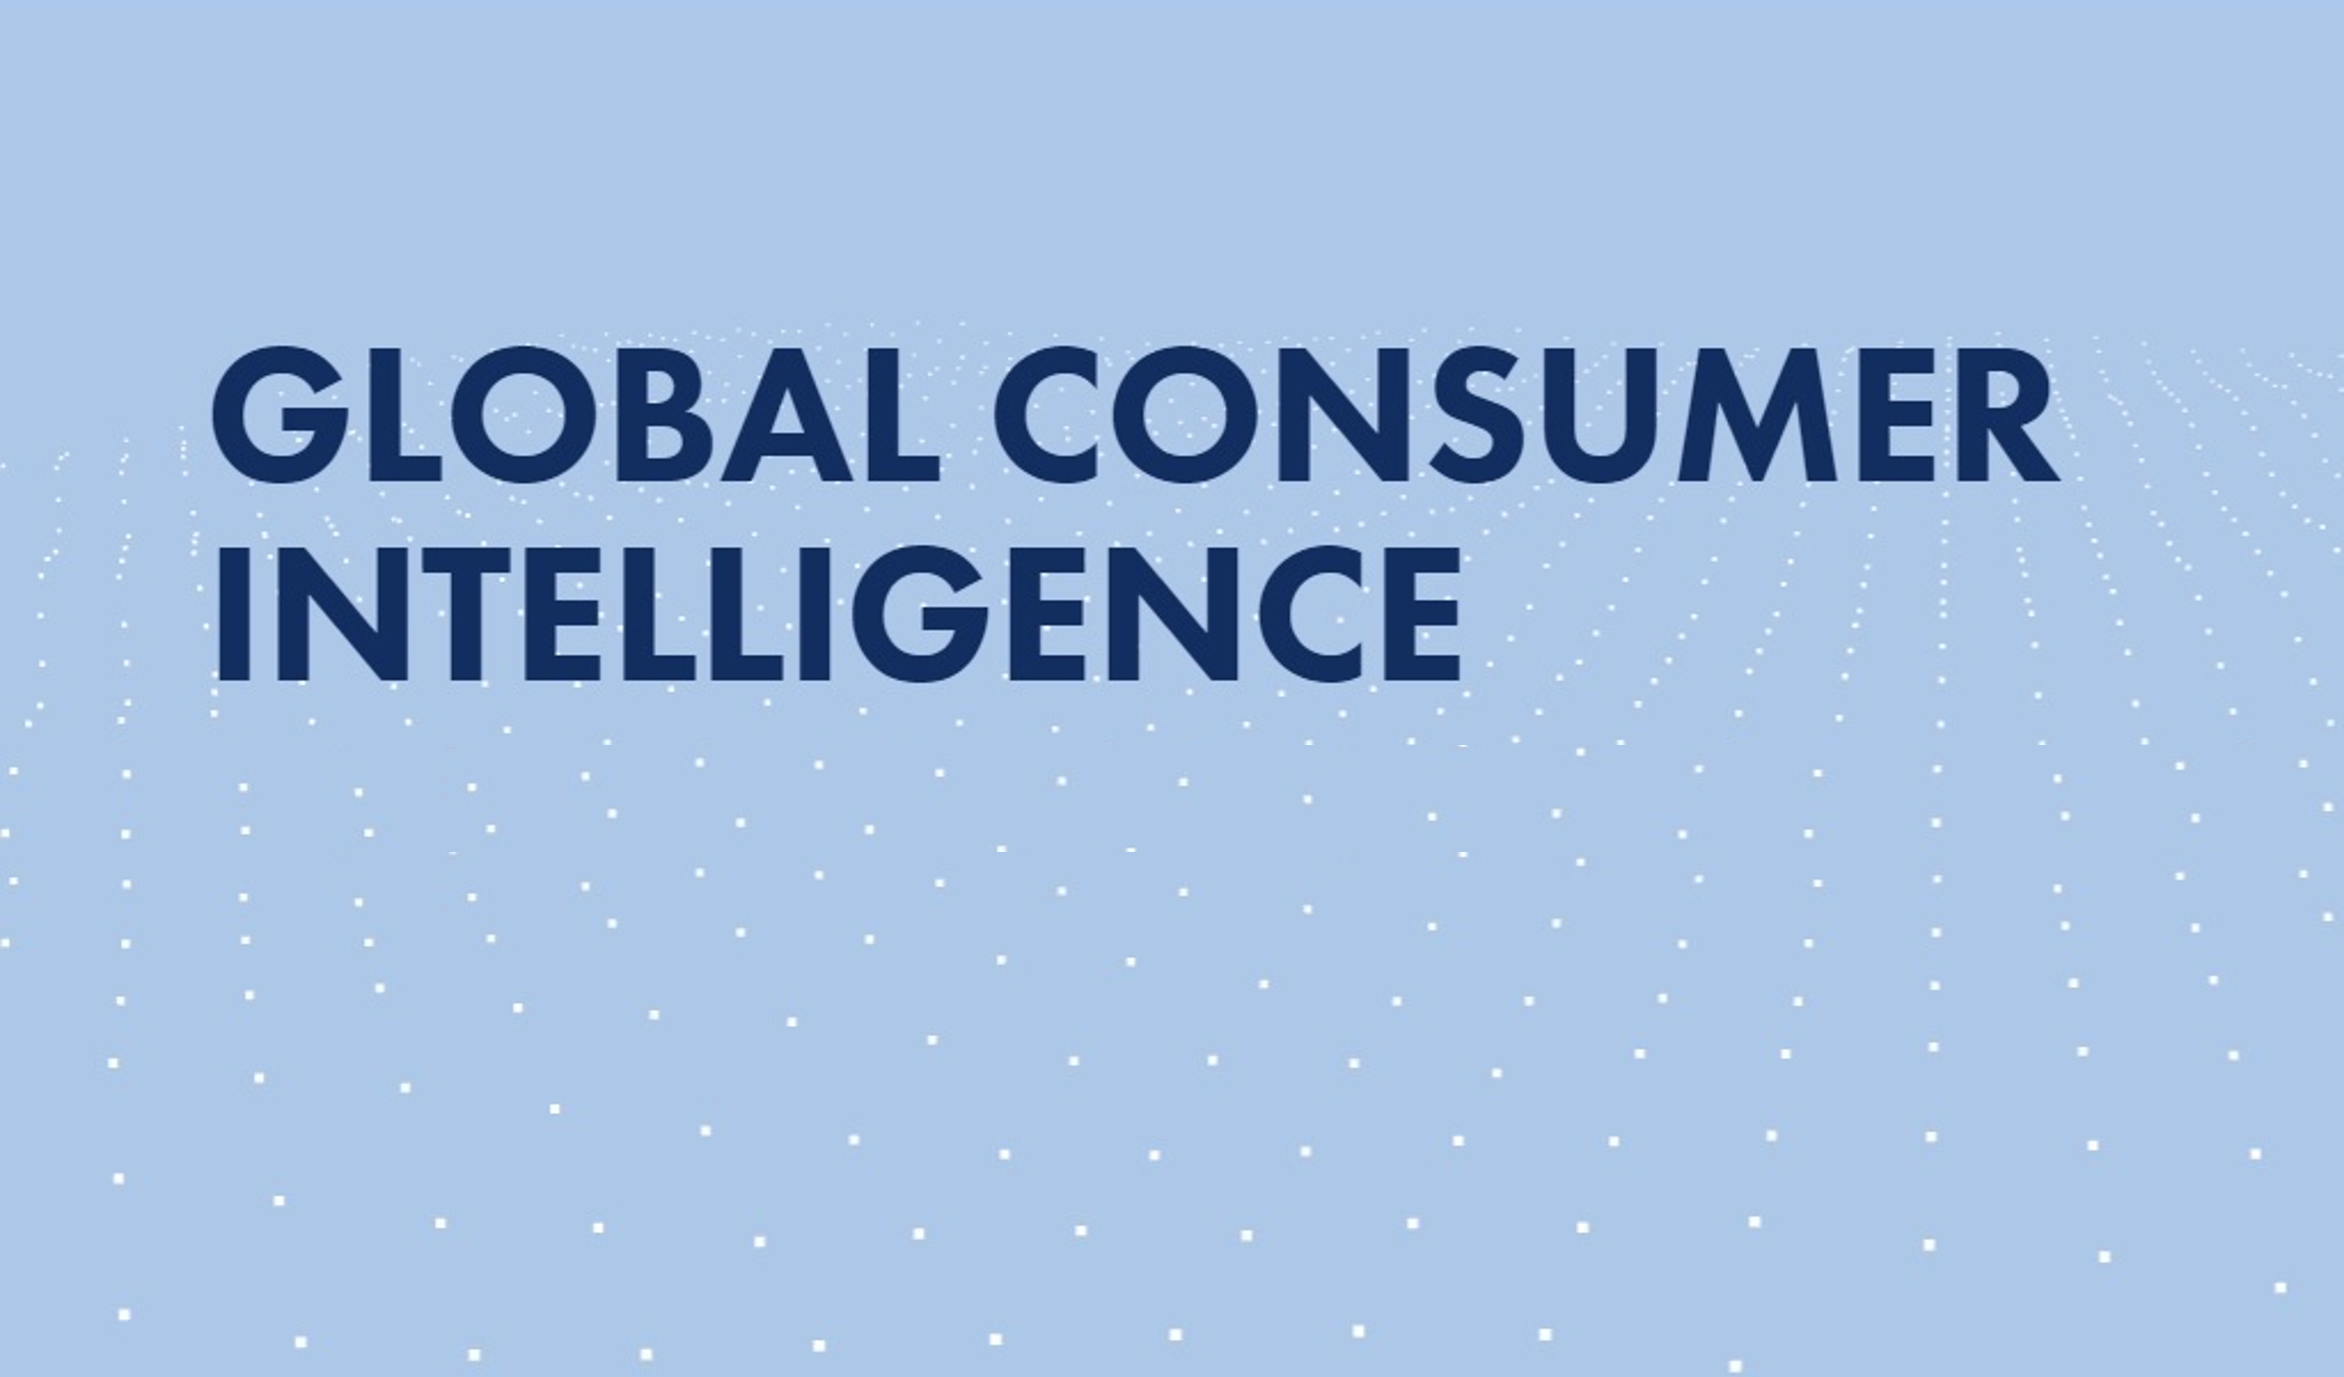 Chair for Global Consumer Intelligence